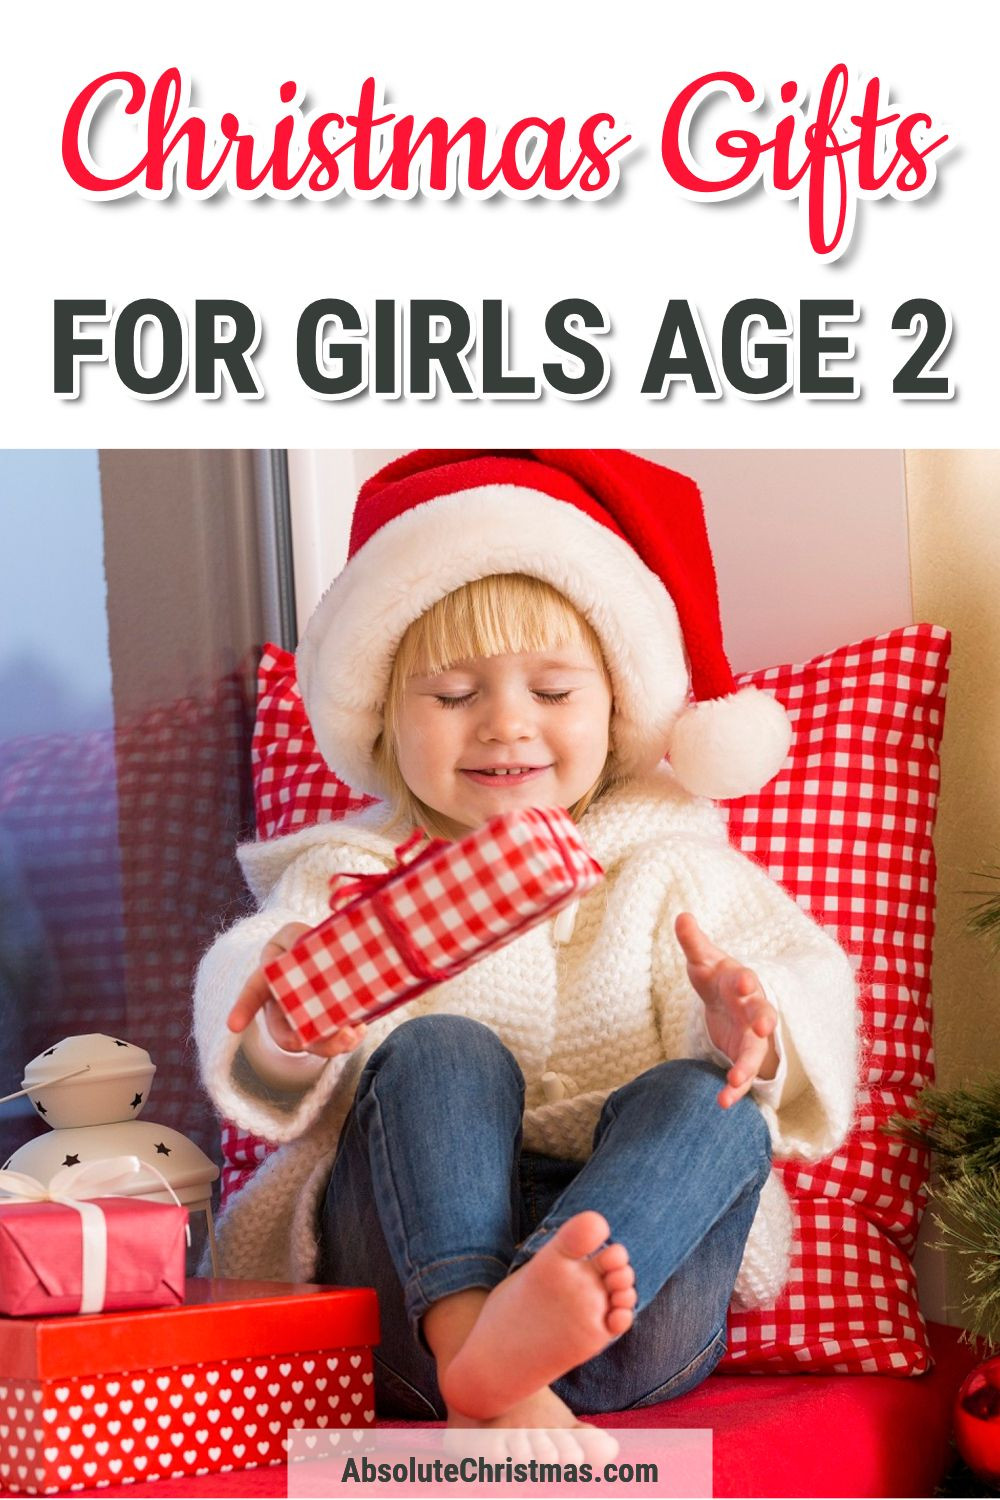 Gift Ideas For 2 Year Old Girls
 Best Christmas Gifts For 2 Year Old Girls 2021